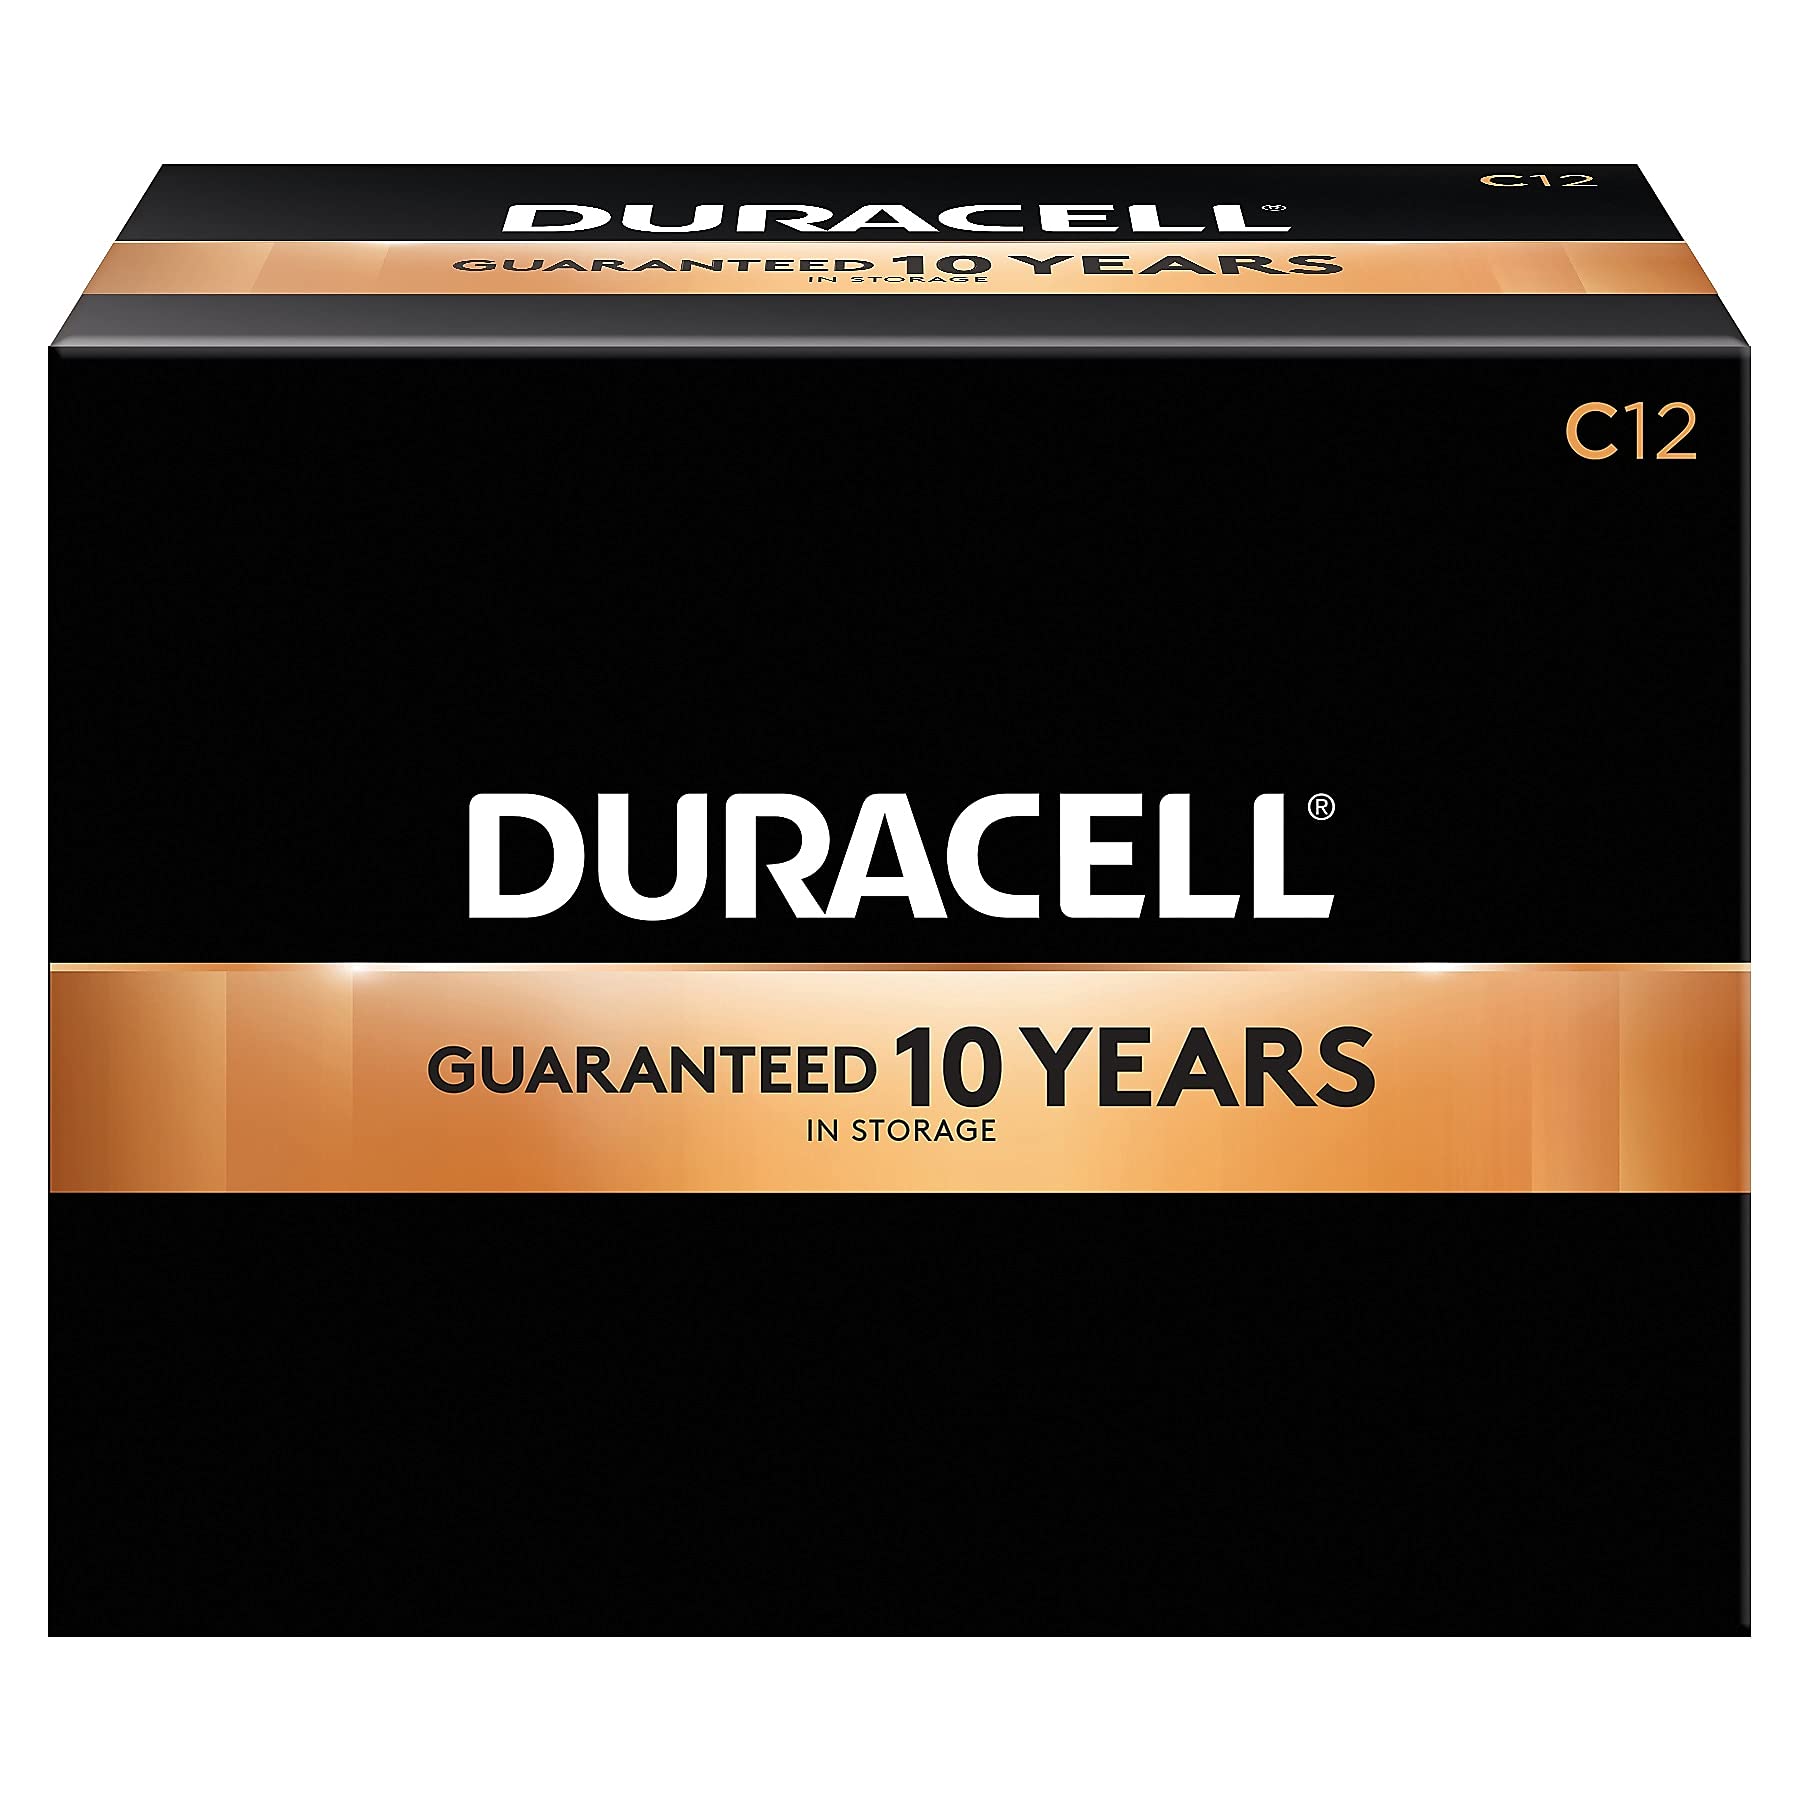 Duracell PGD MN1400 Coppertop Battery, Alkaline, C Size (Pack of 12)